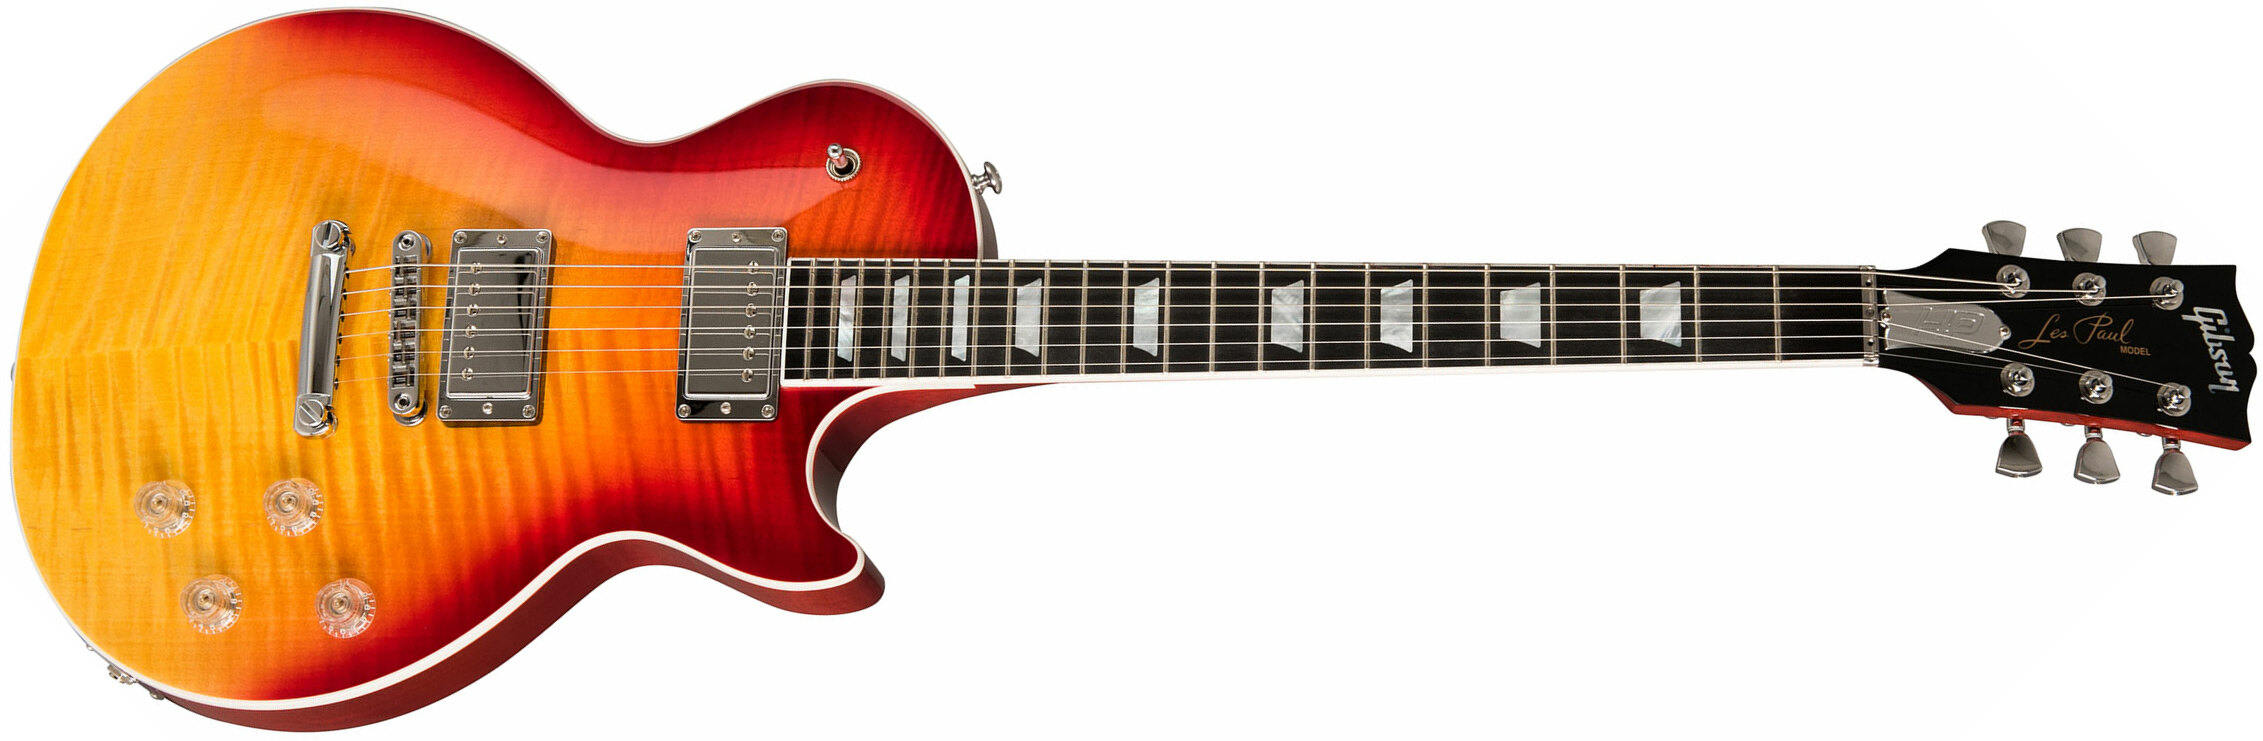 Gibson Les Paul Hp-ii High Performance 2019 2h Ht Ric - Heritage Cherry Fade - Guitare Électrique Single Cut - Main picture